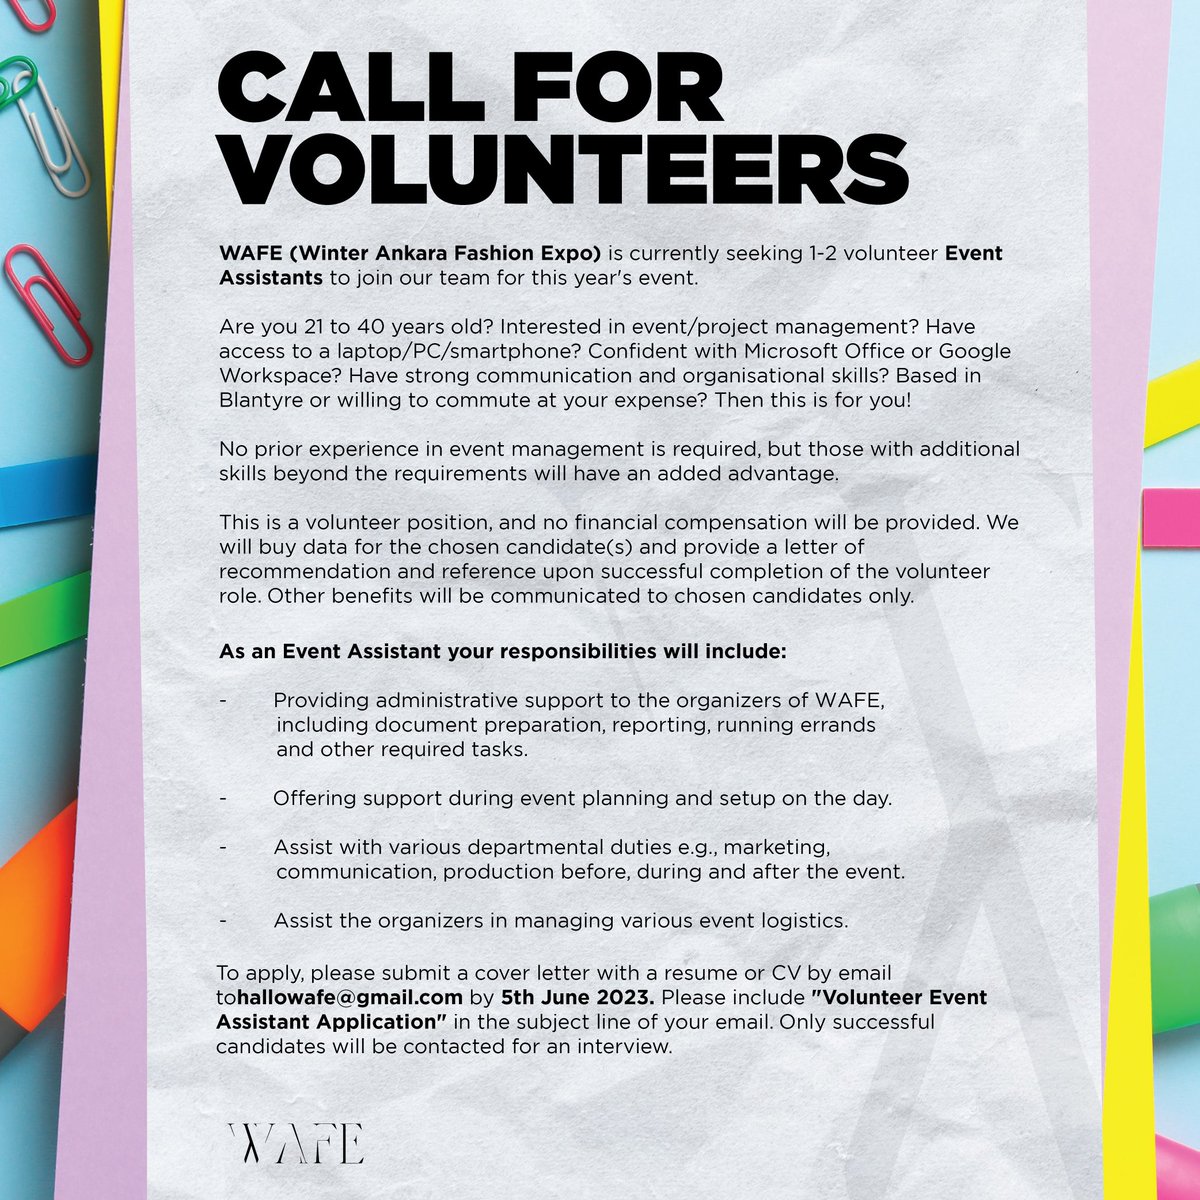 The WAFE team is looking for 1 to 2 volunteers to be part of this year's event. Check out poster for details on how to apply.